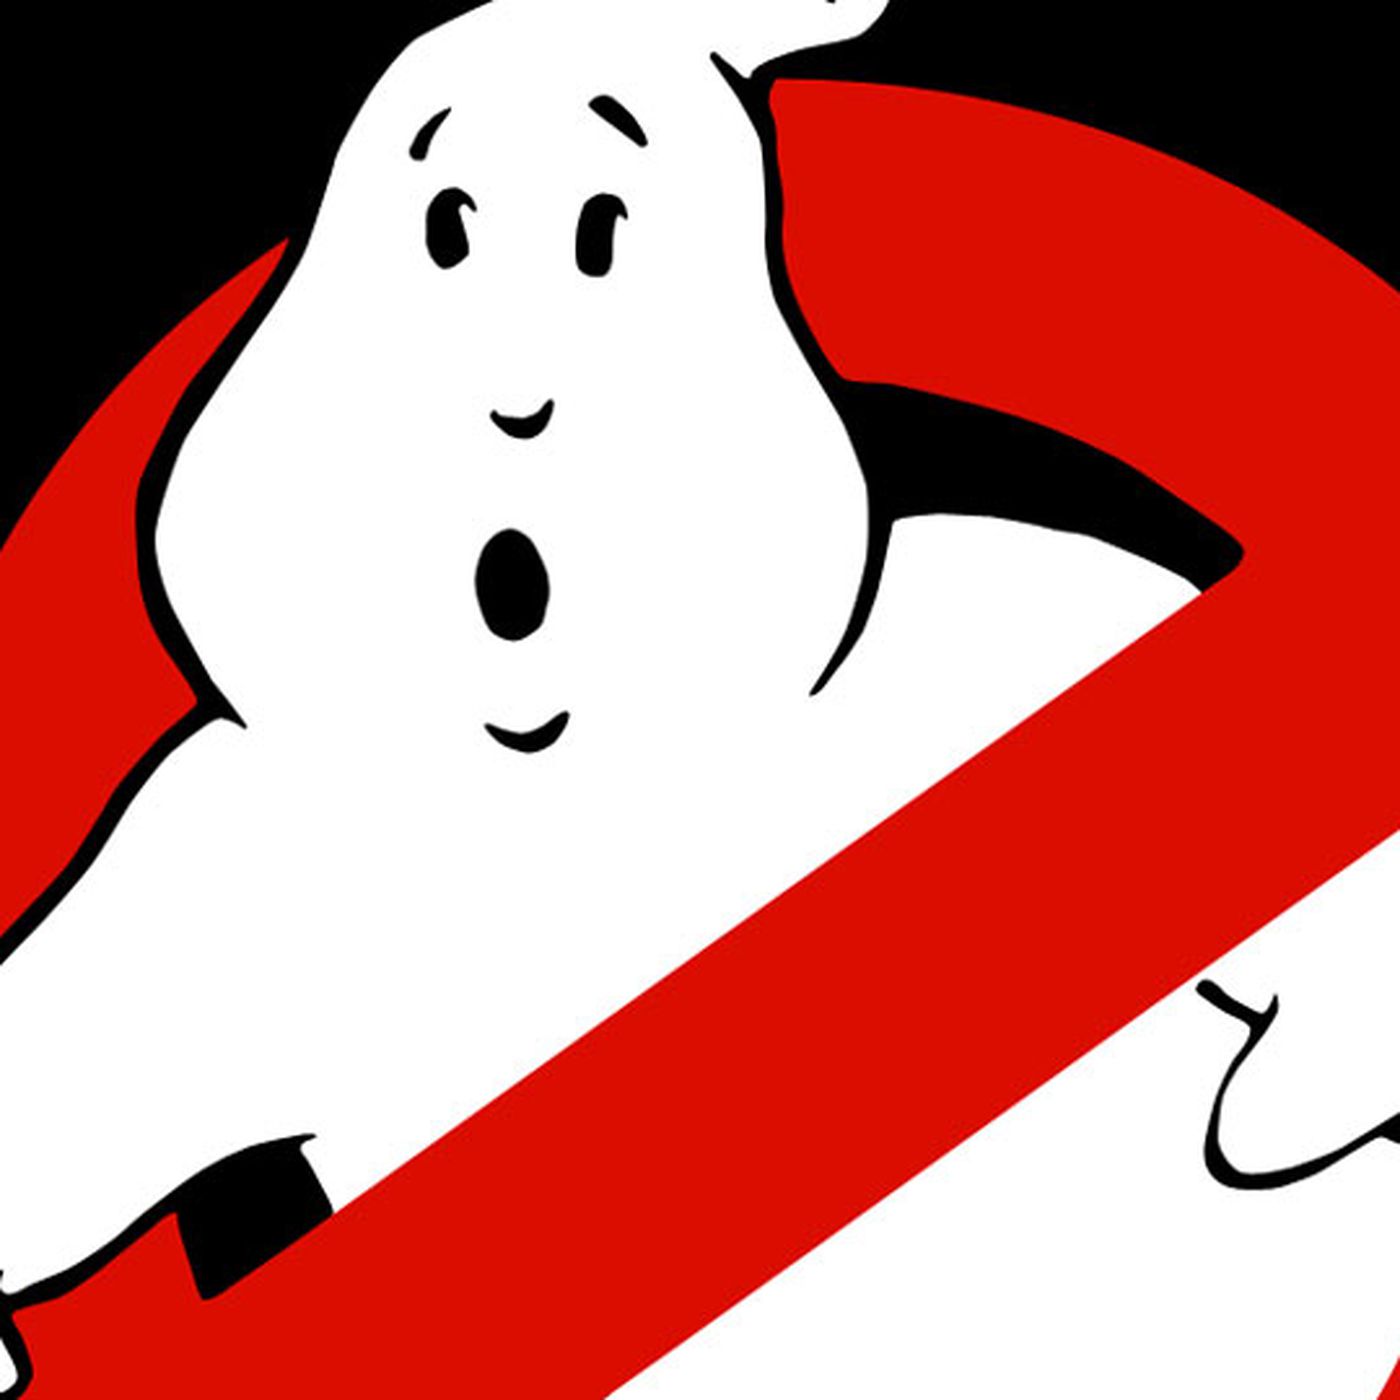 New Ghostbusters animated series coming to Netflix - Polygon